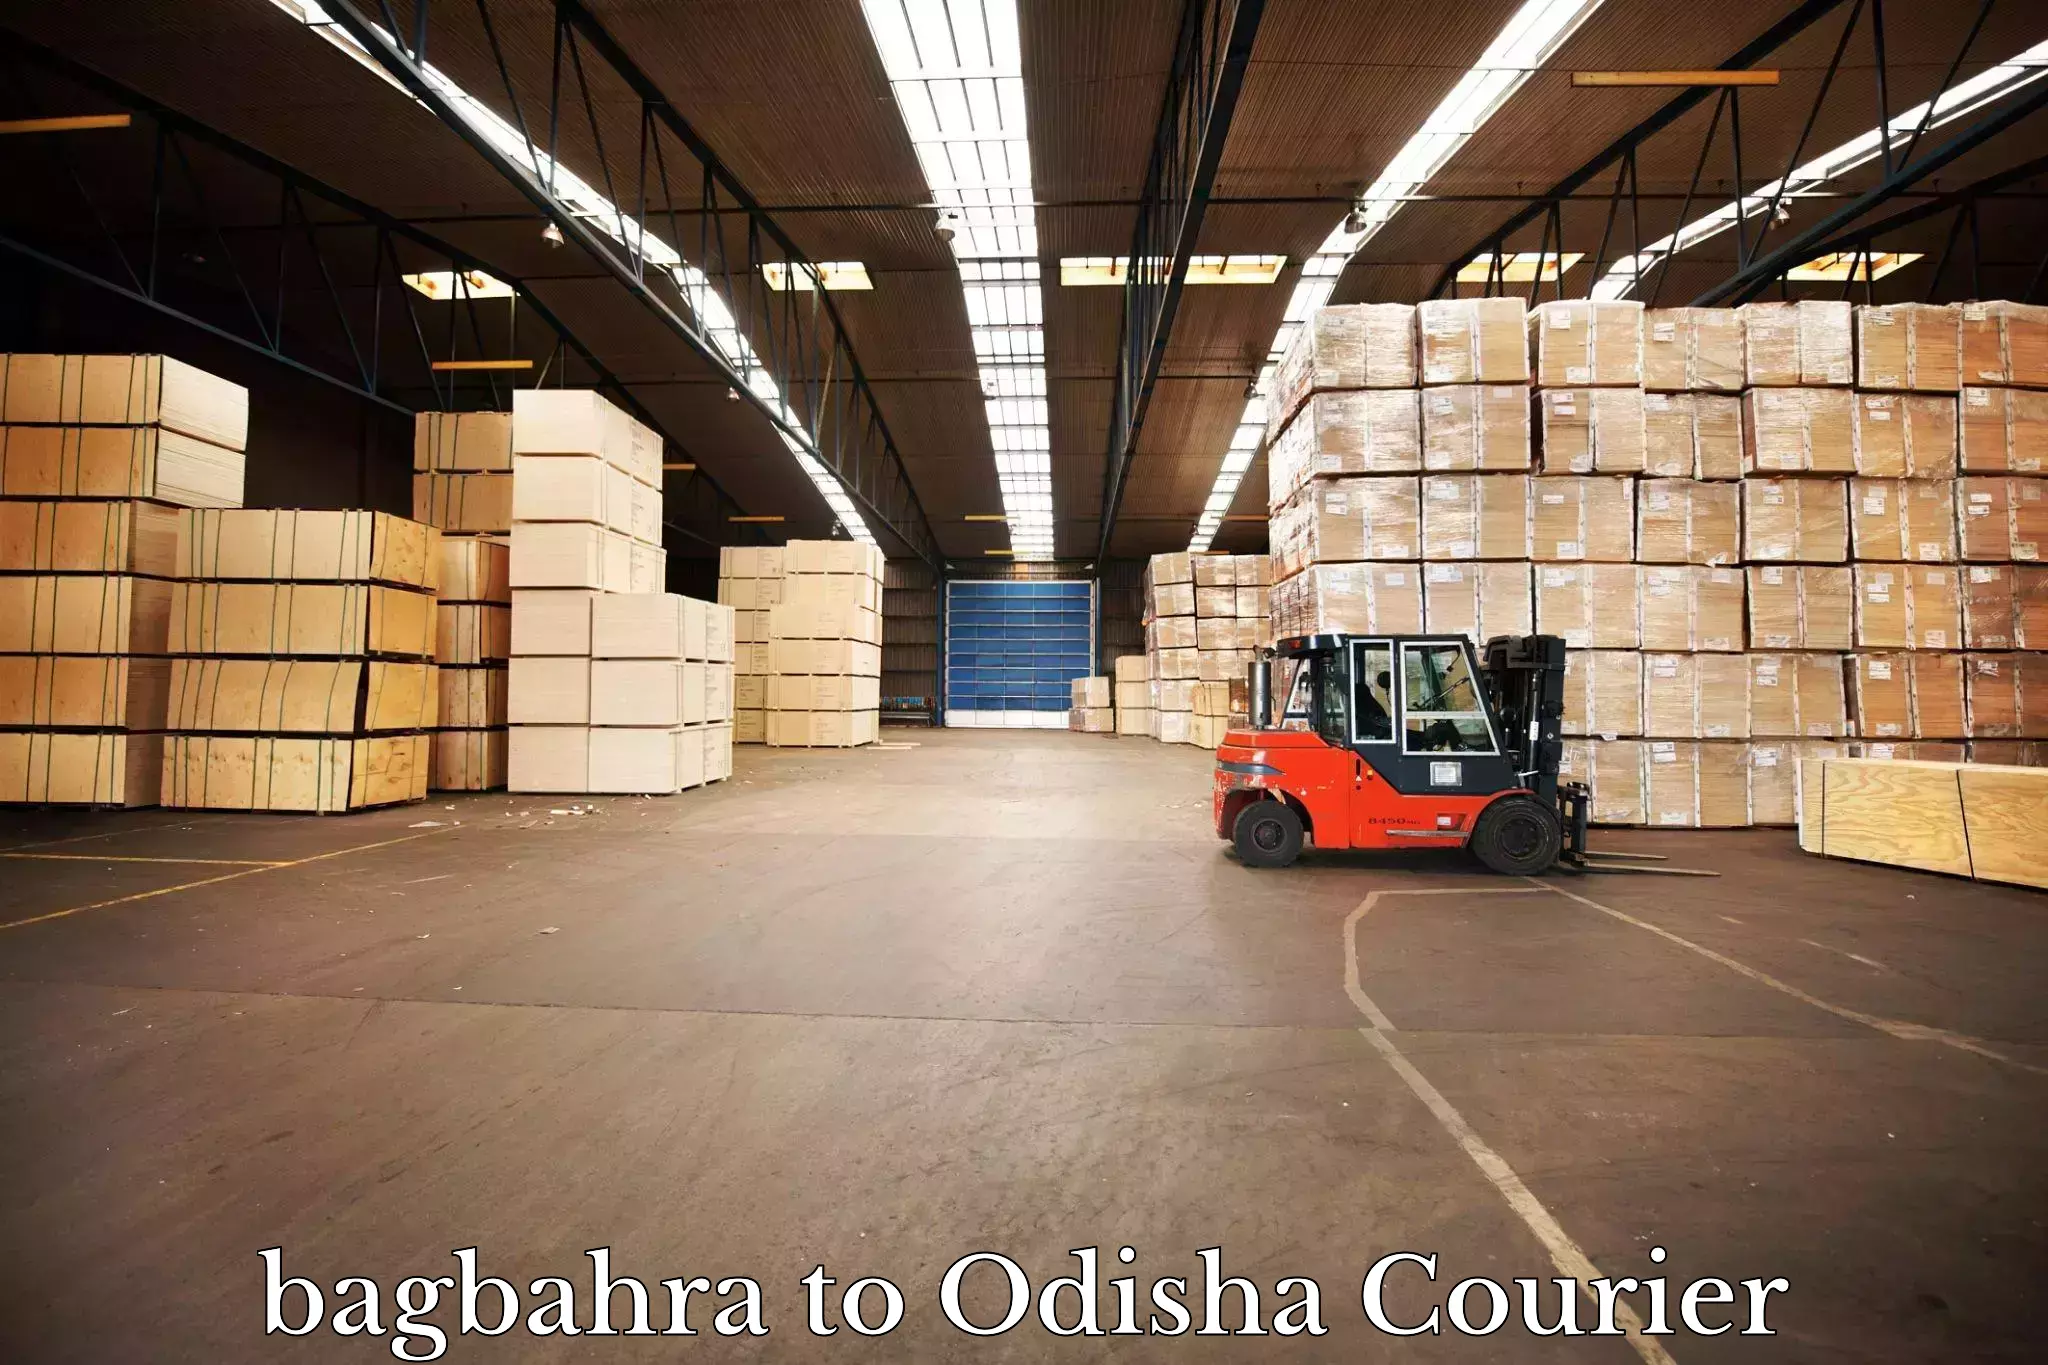 Ocean freight courier in bagbahra to Odisha